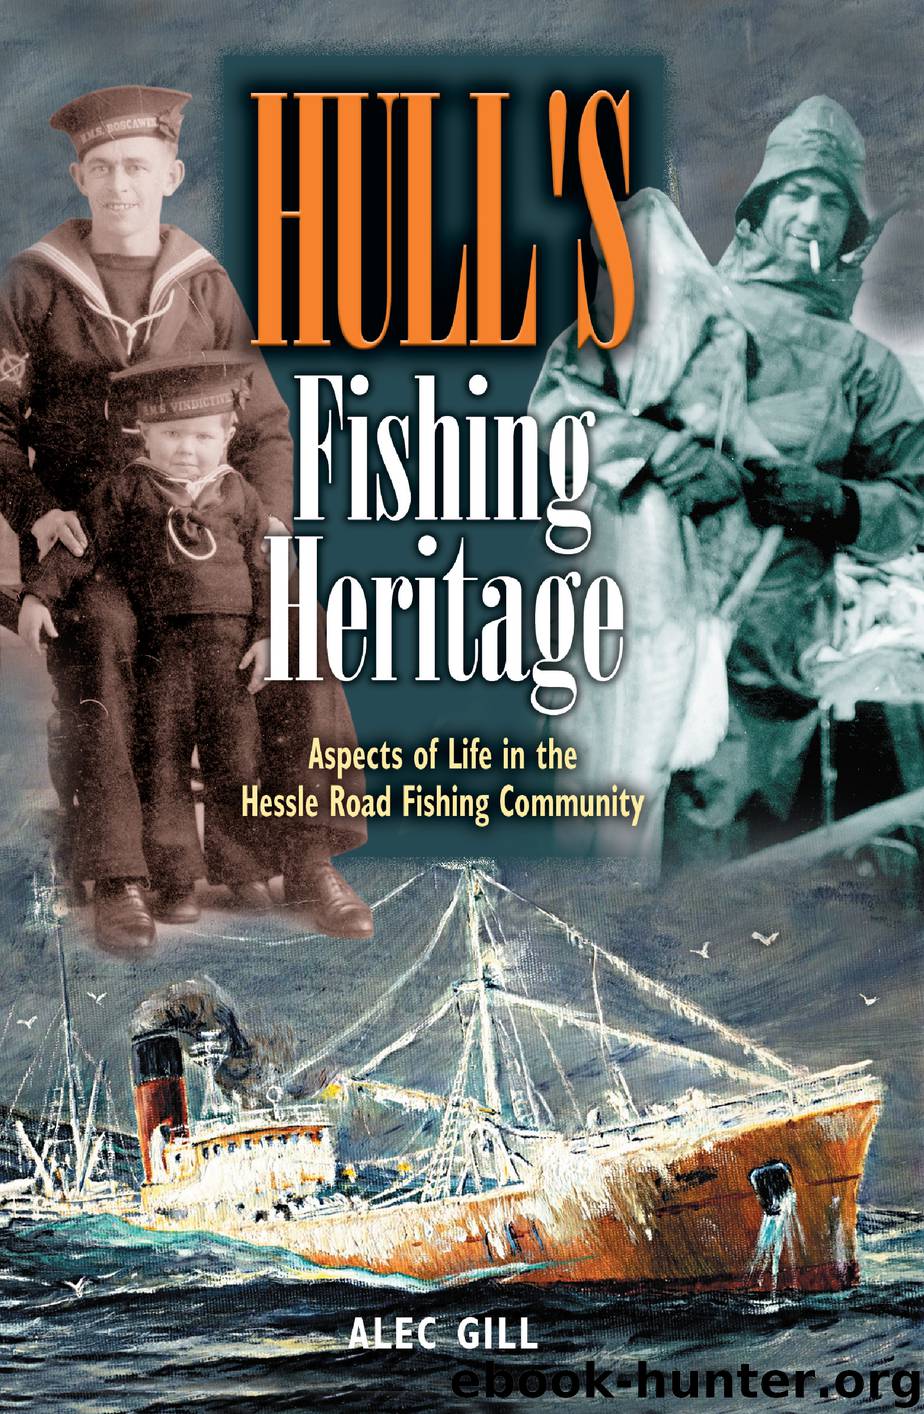 Hull’s Fishing Heritage by Alec Gill